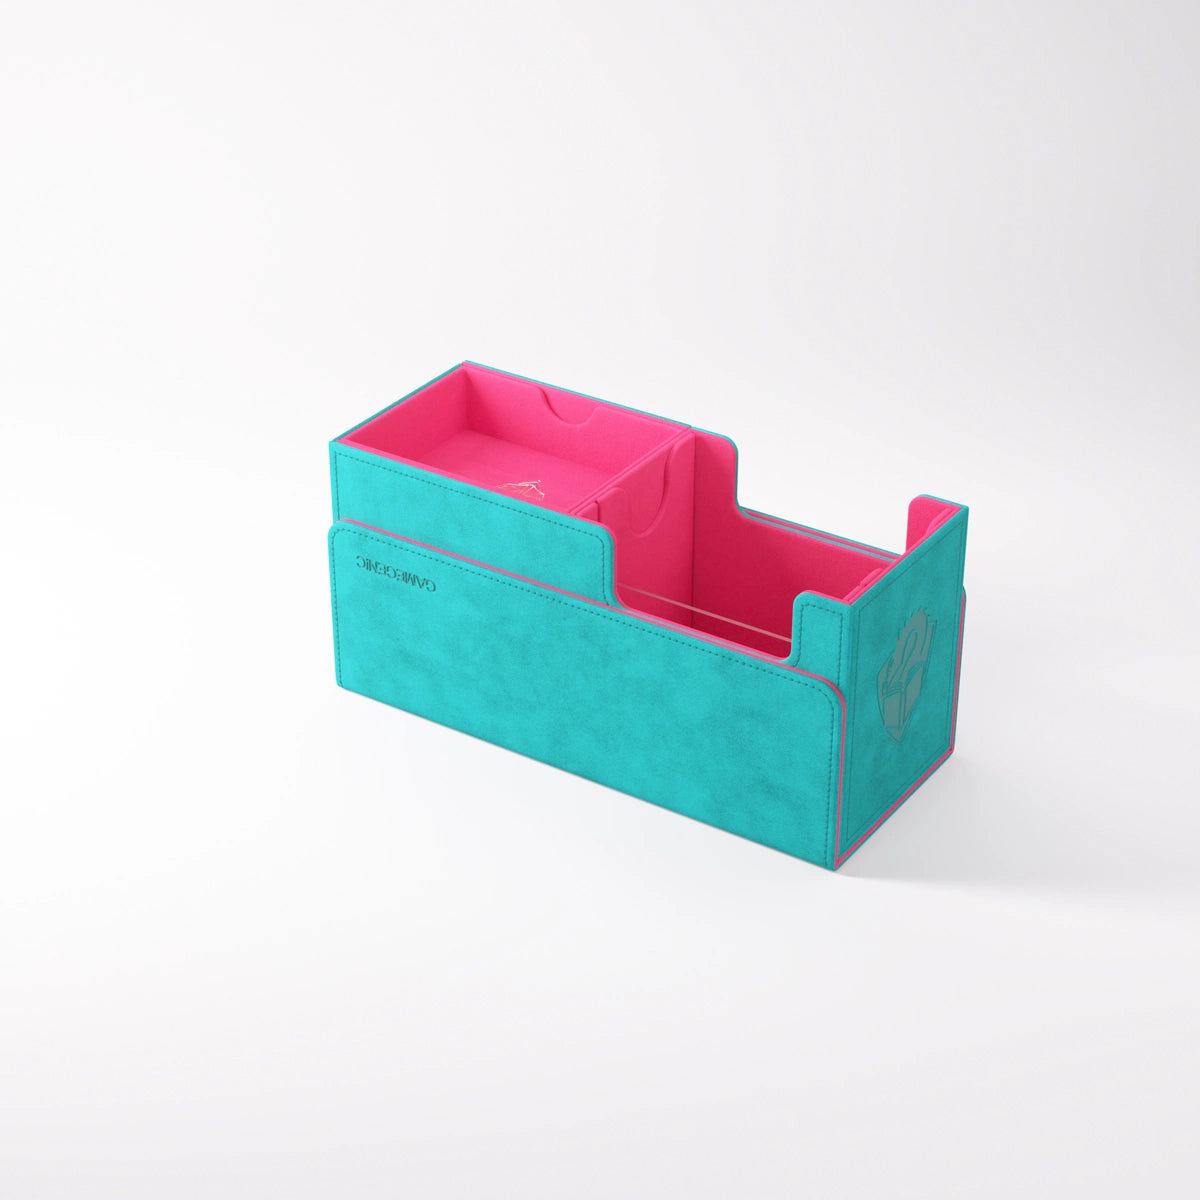 Deck Box: The Academic 133+ XL Teal/Pink Tolarian Edition